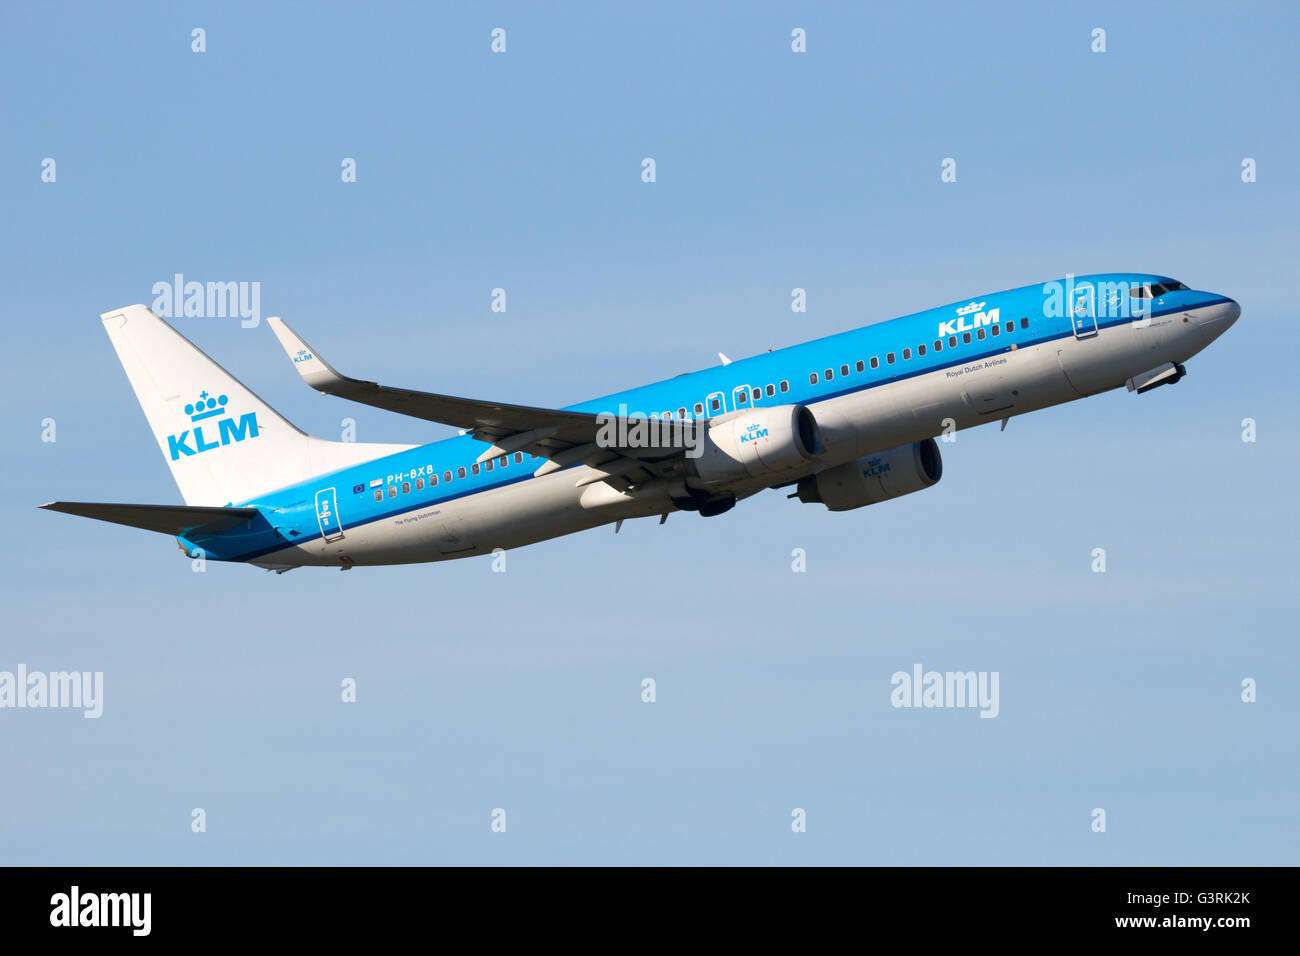 KLM Royal Dutch Airlines Boeing 737 take-off from Schiphol airport Stock Photo